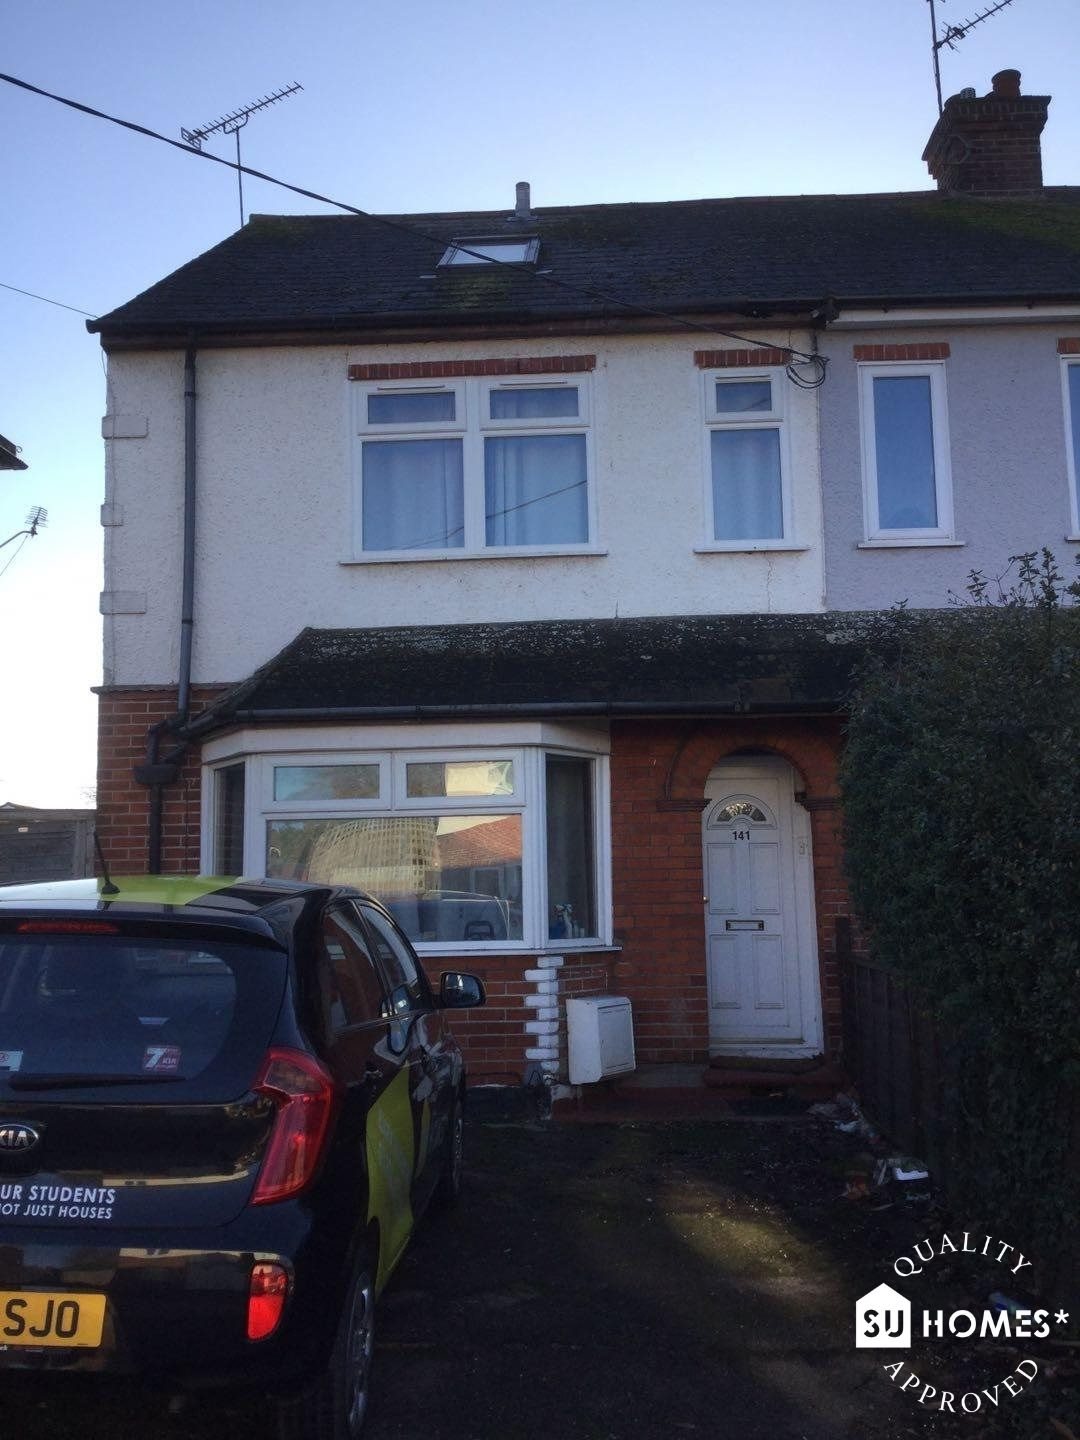 1 bed house / flat share to rent in Goring Road 0